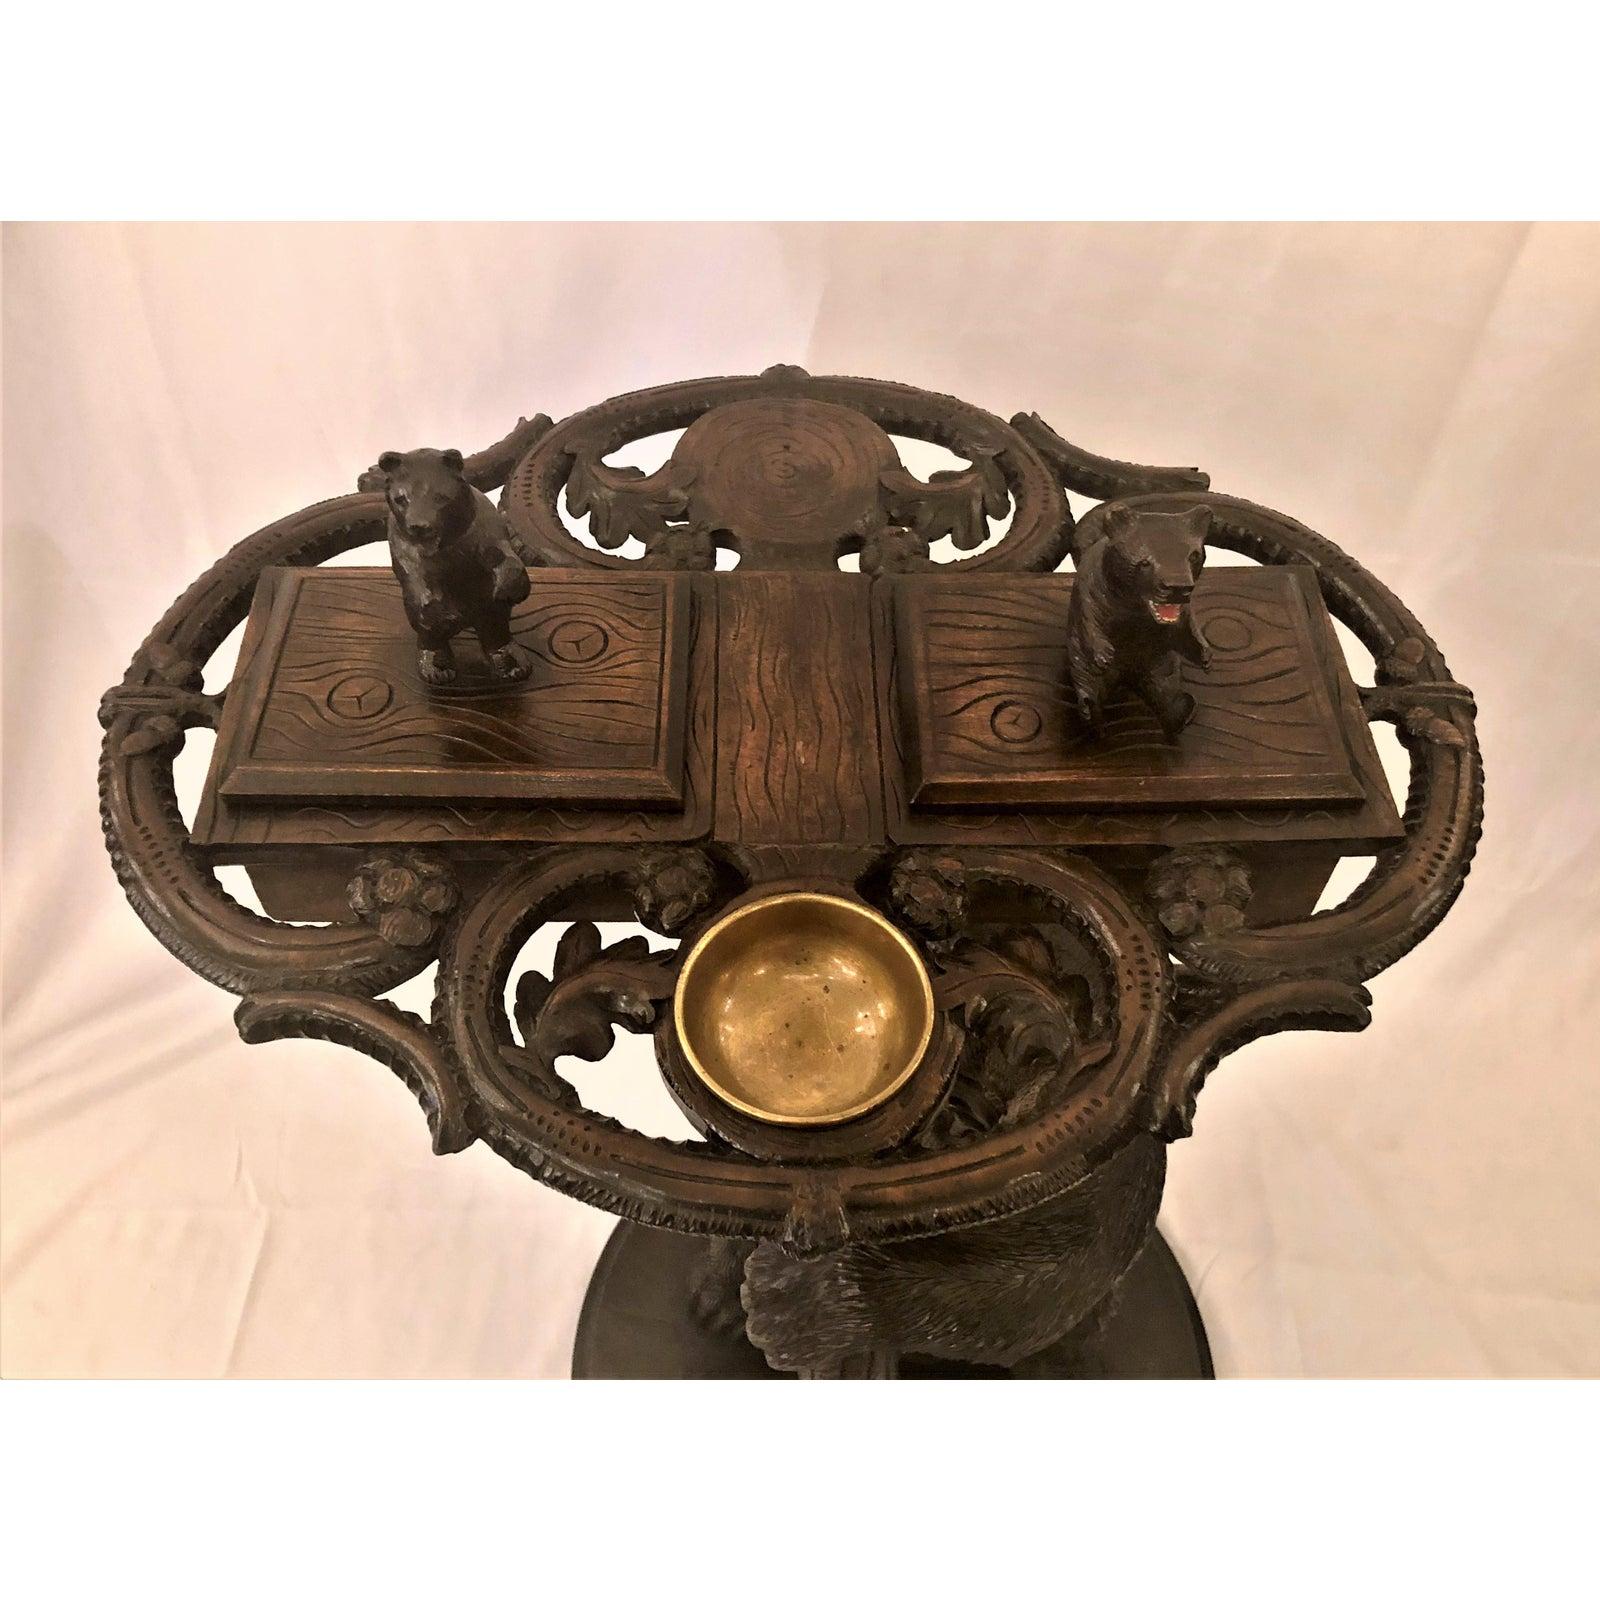 Antique black forest carved oak bear smoker's stand, circa 1880. This is an amazing stand and with the additional fanciful element of a music box, somewhat over the top. The bear's head rolls back for storage. This would be a conversation and a fun